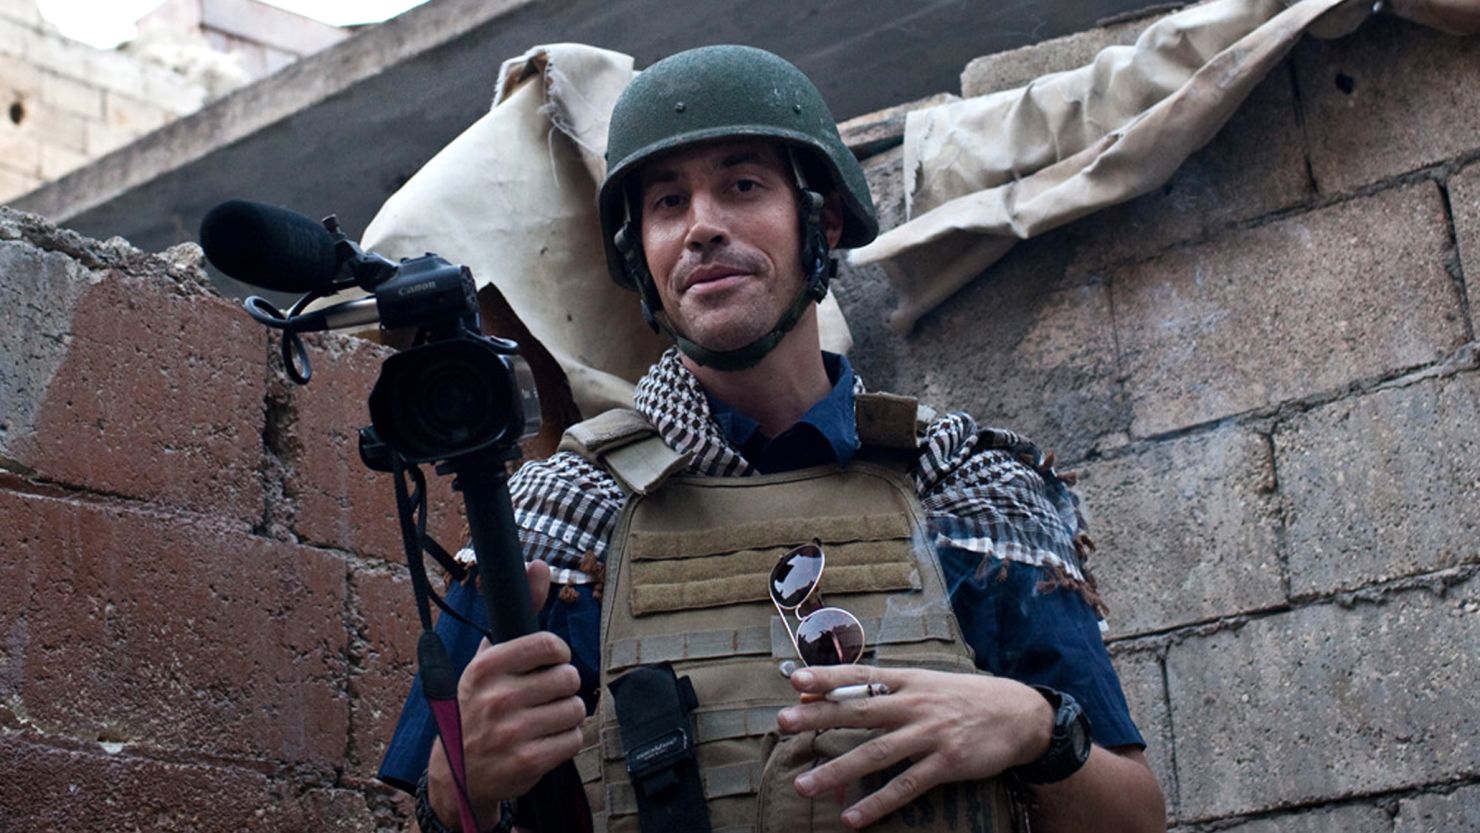 U.S. journalist James Foley, beheaded by ISIS, is pictured here in Aleppo on November 5, 2012.